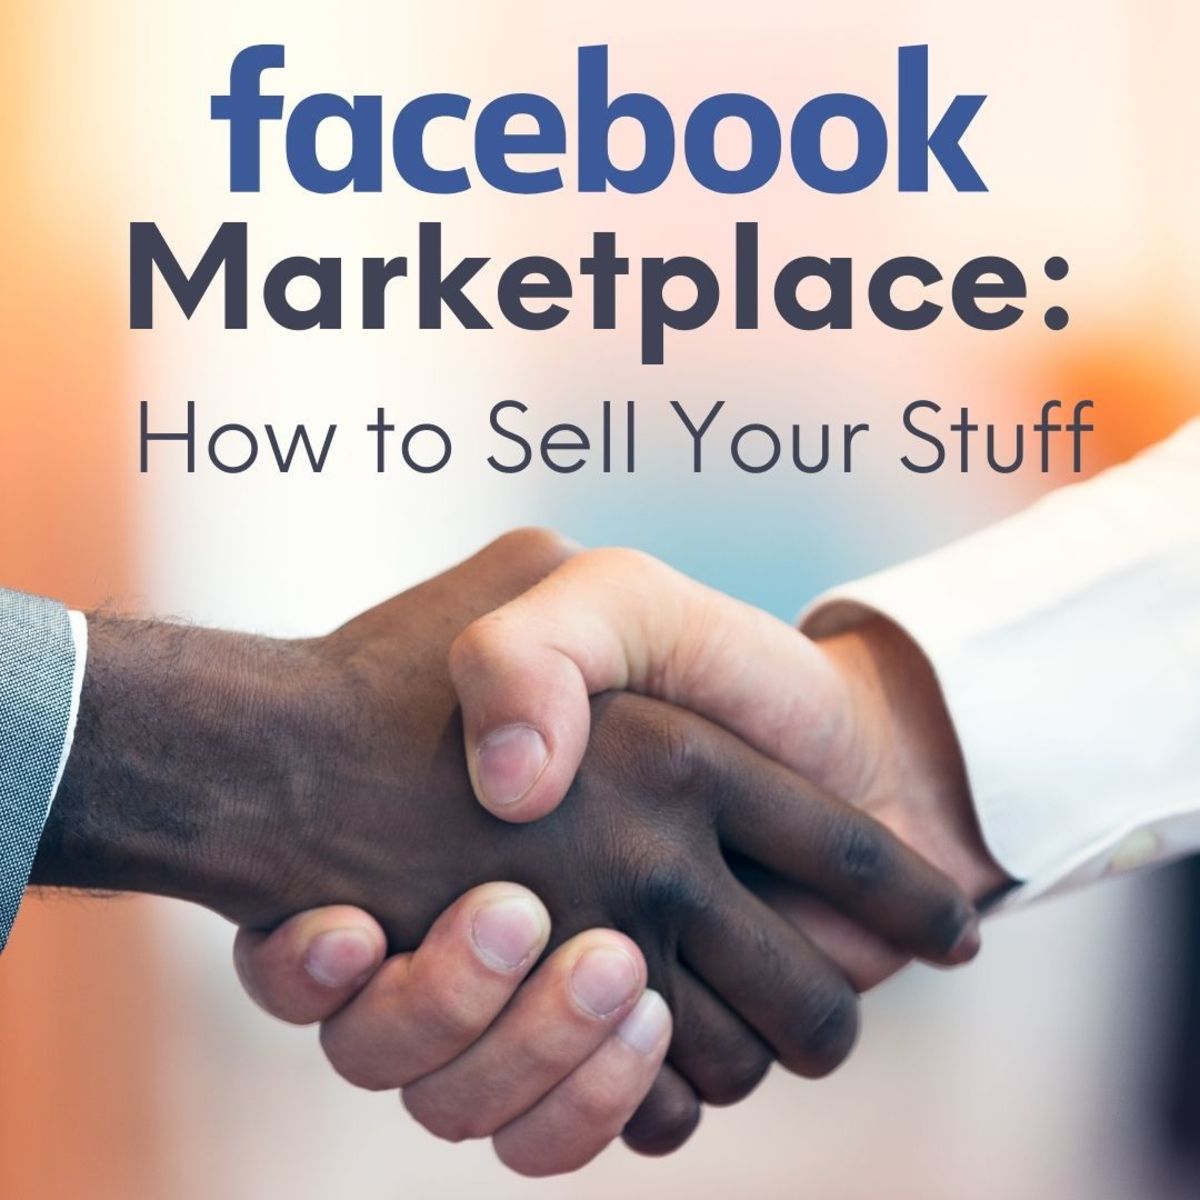 How to sell your stuff on Facebook Marketplace